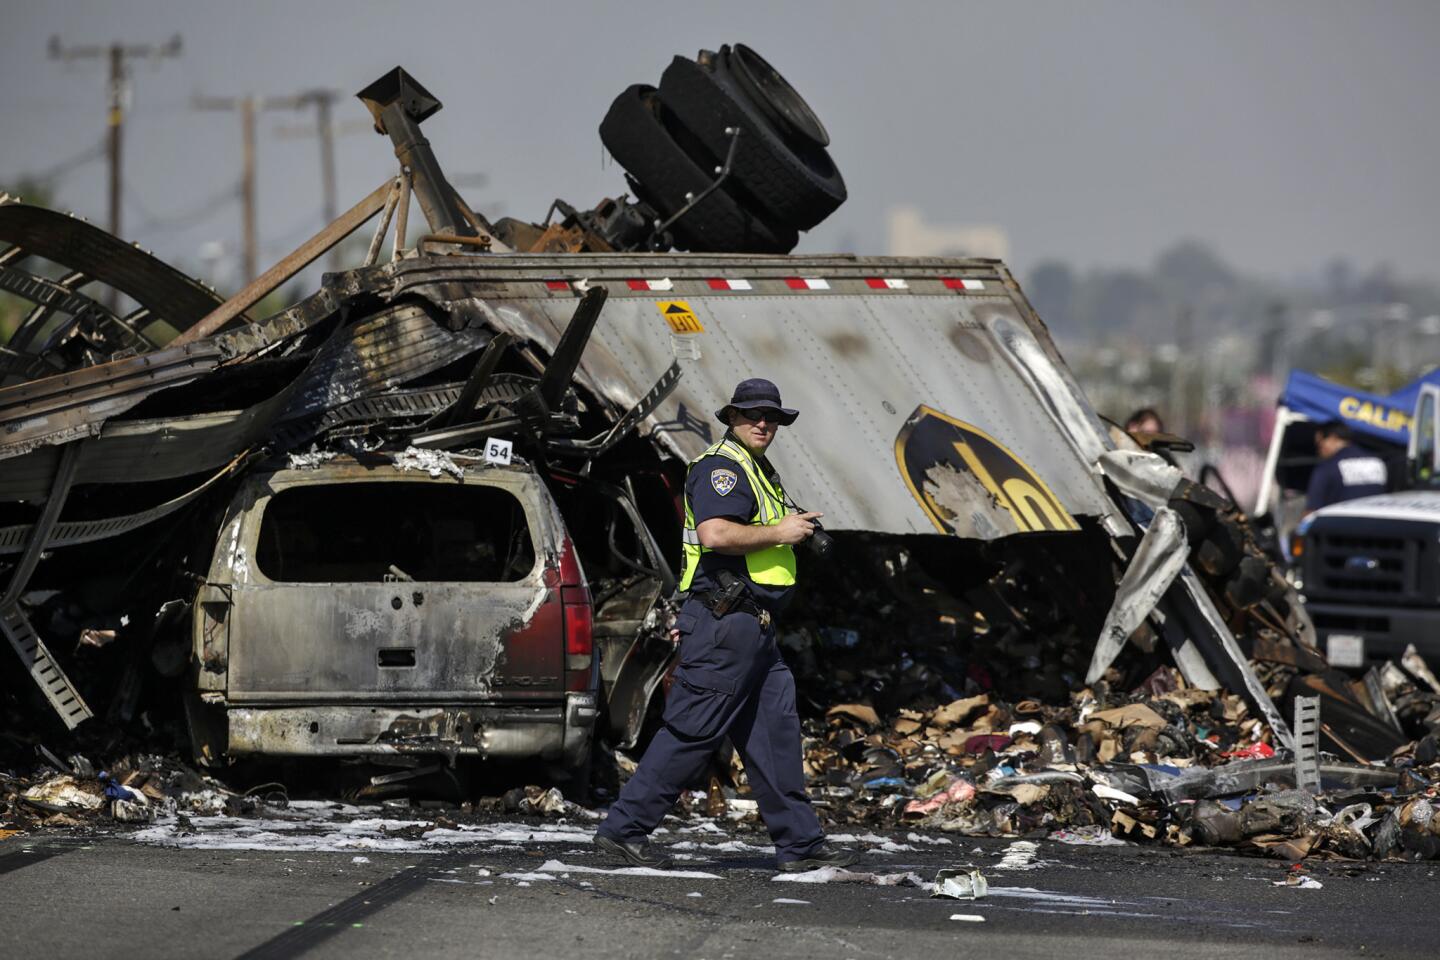 A California Highway Patrol investigator takes photographs at the scene of Saturday's multivehicle crash on the 5 Freeway in Commerce that killed three people.